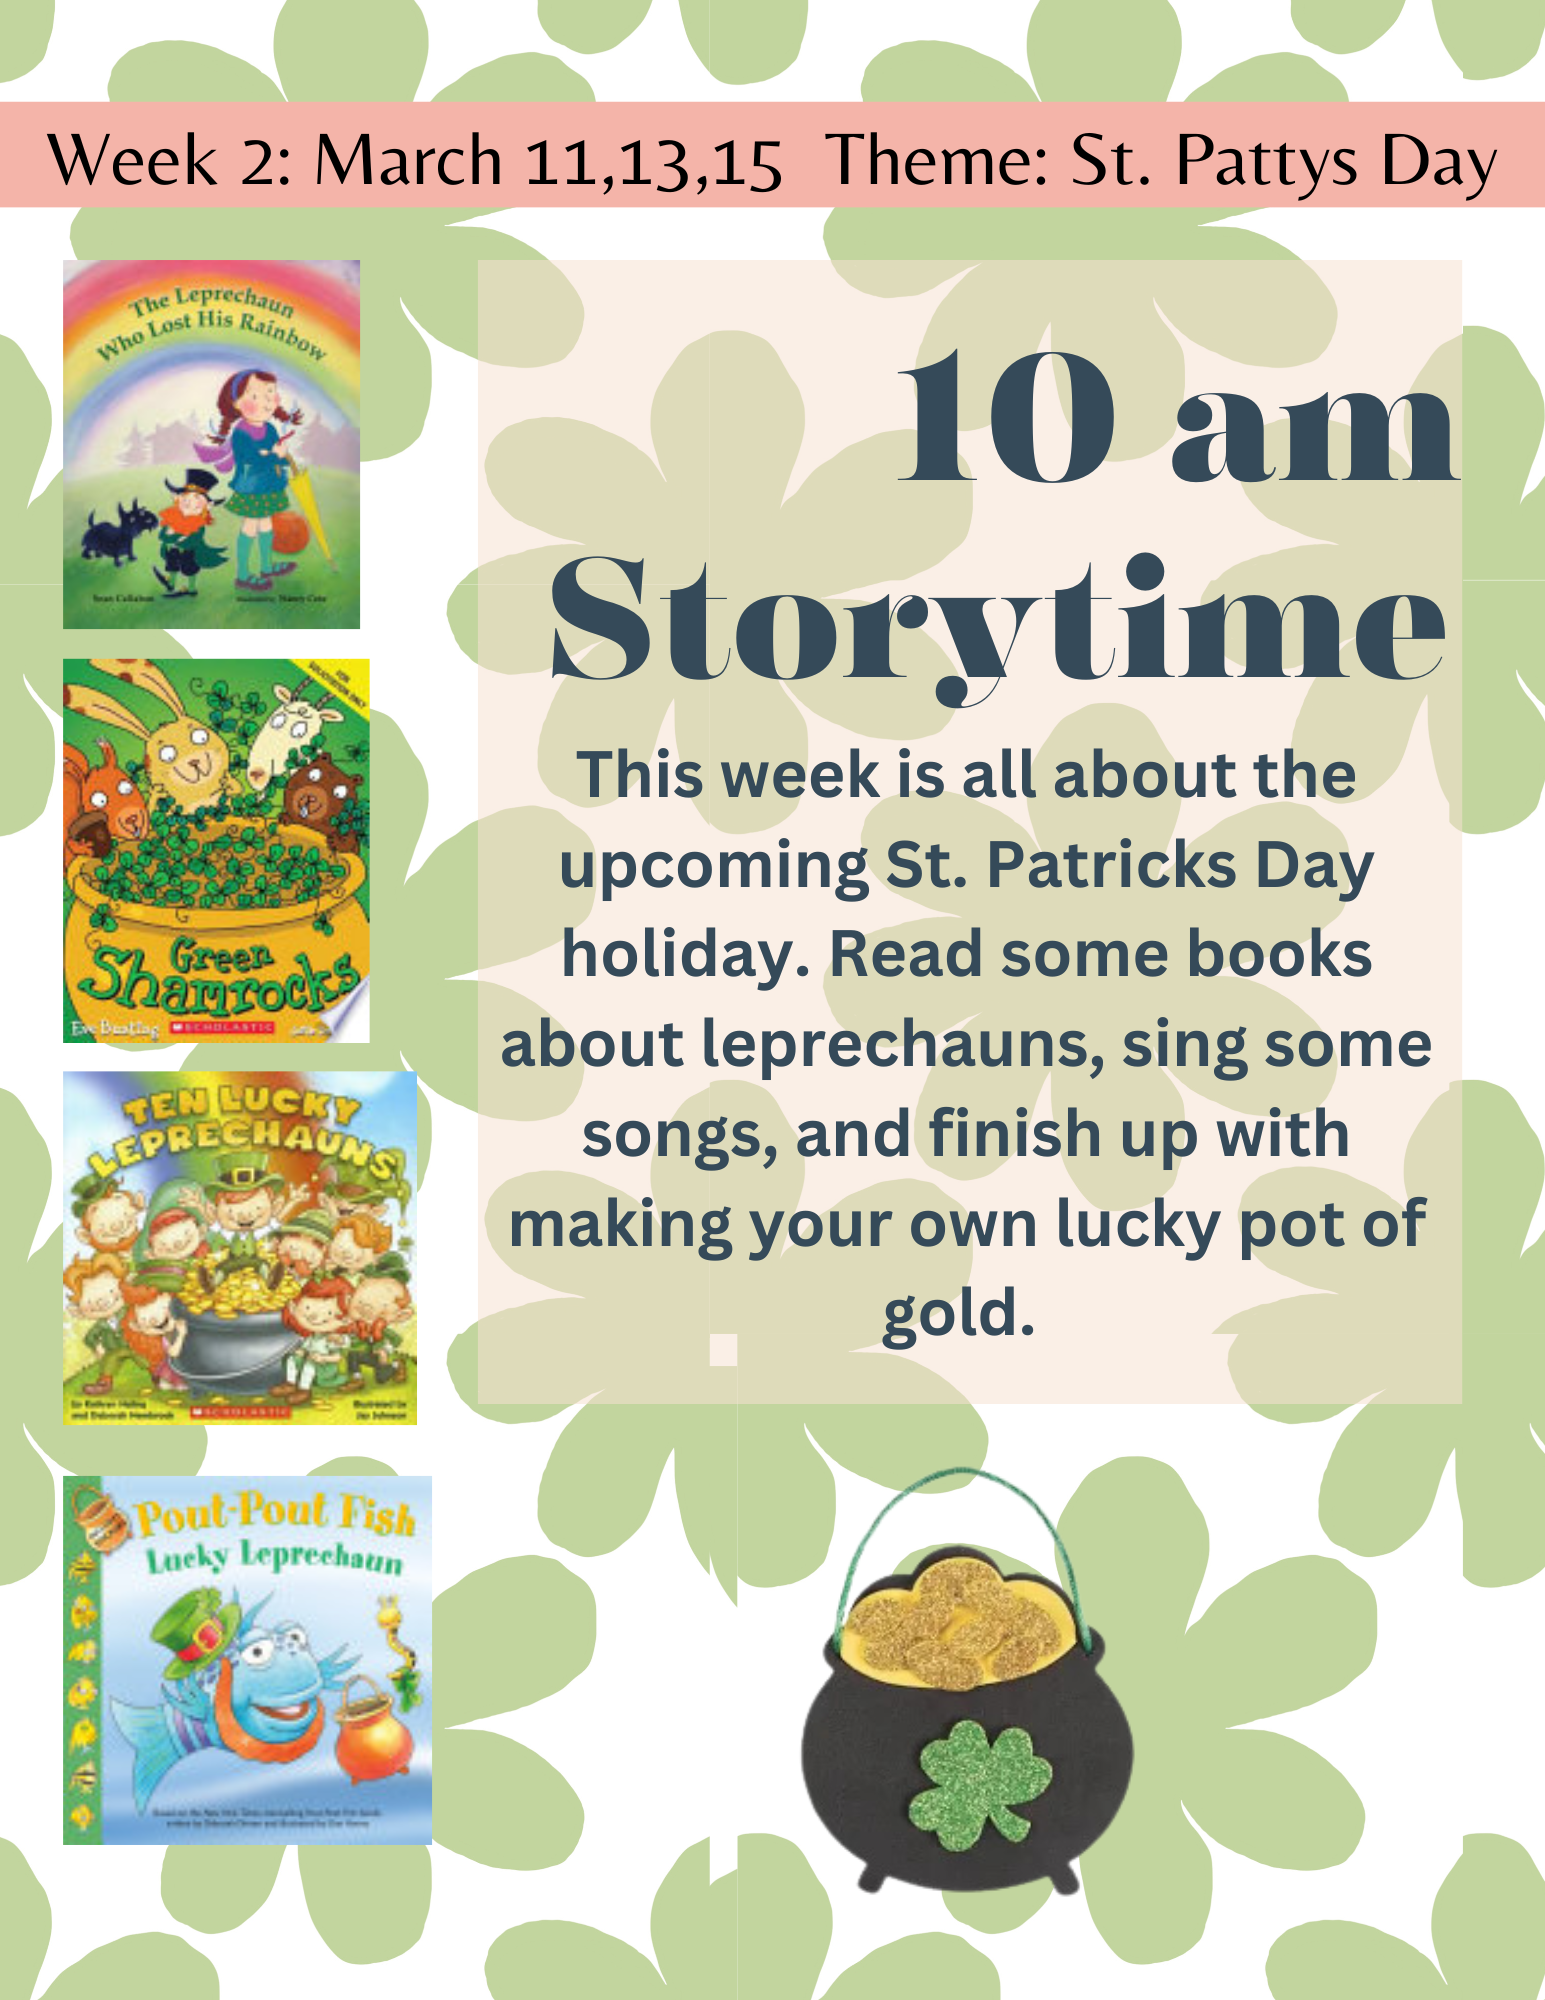 St Patty's Day Storytime